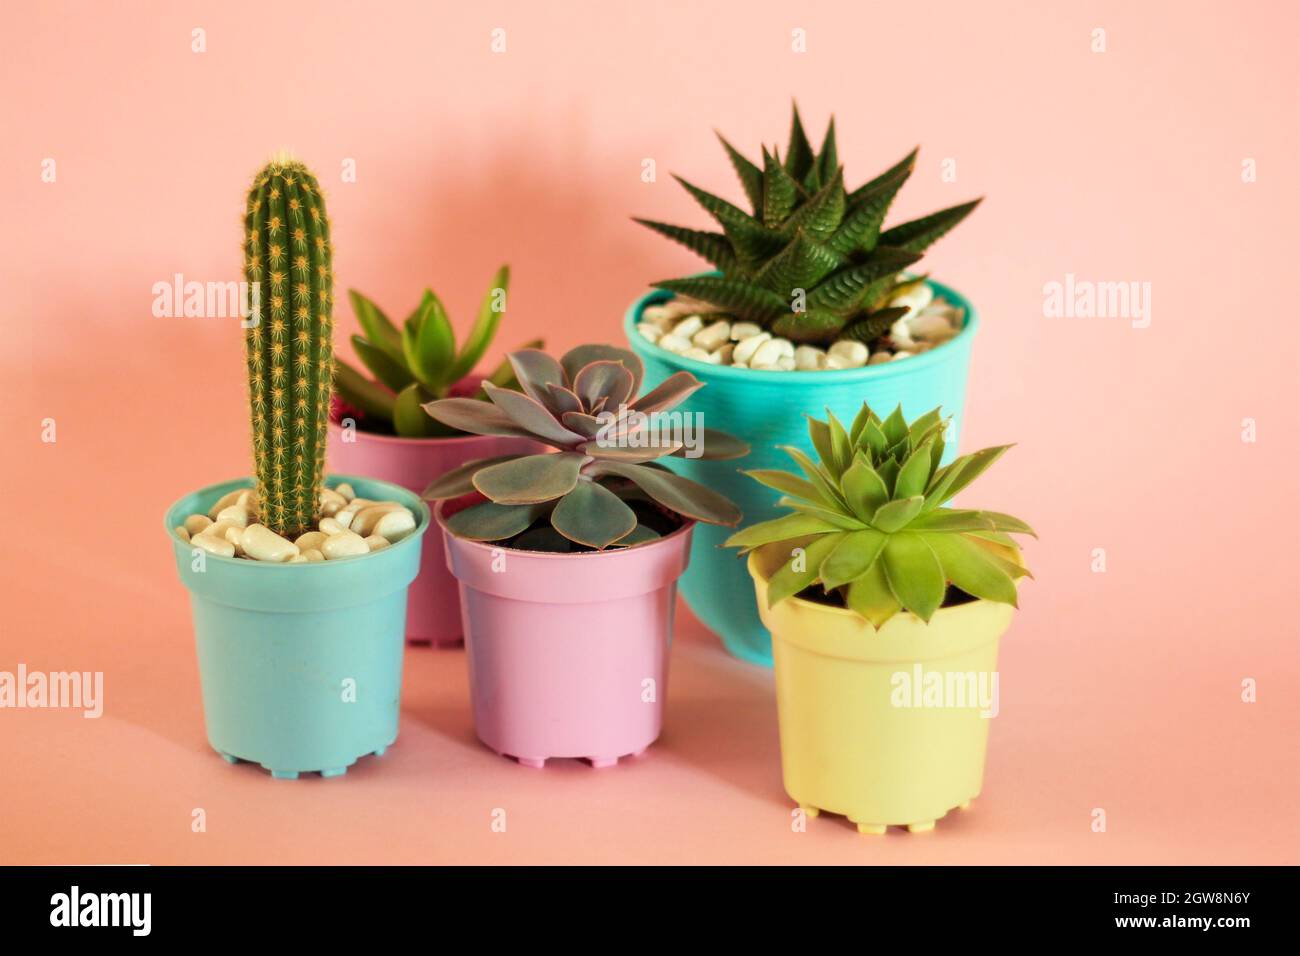 Cacti And Succulents On A Pink Background. Home Flowers. Stock Photo